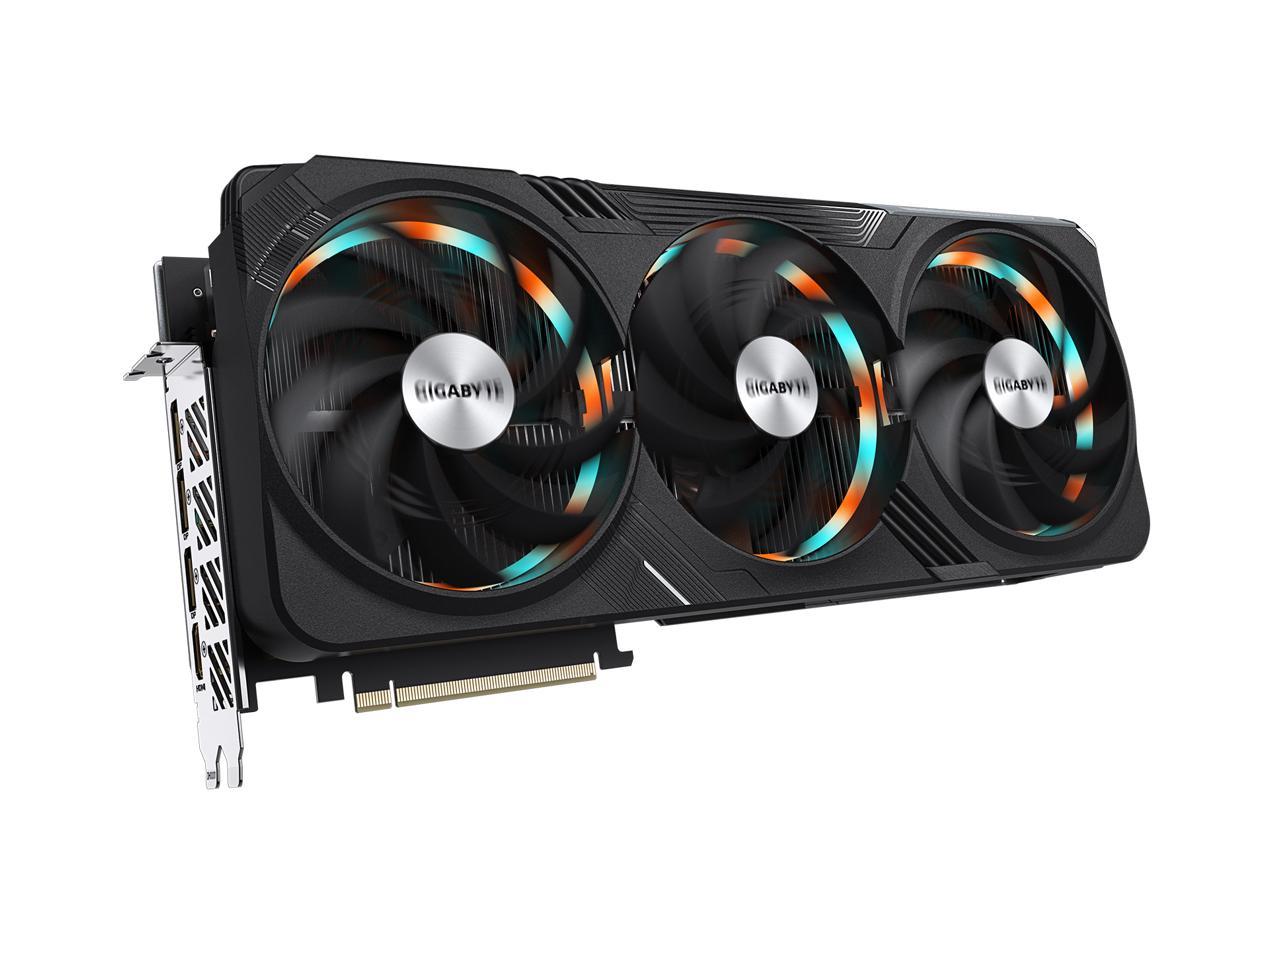 Experience Unmatched Graphics And Performance With The Gigabyte GeForce RTX 3060 Gaming OC 12G